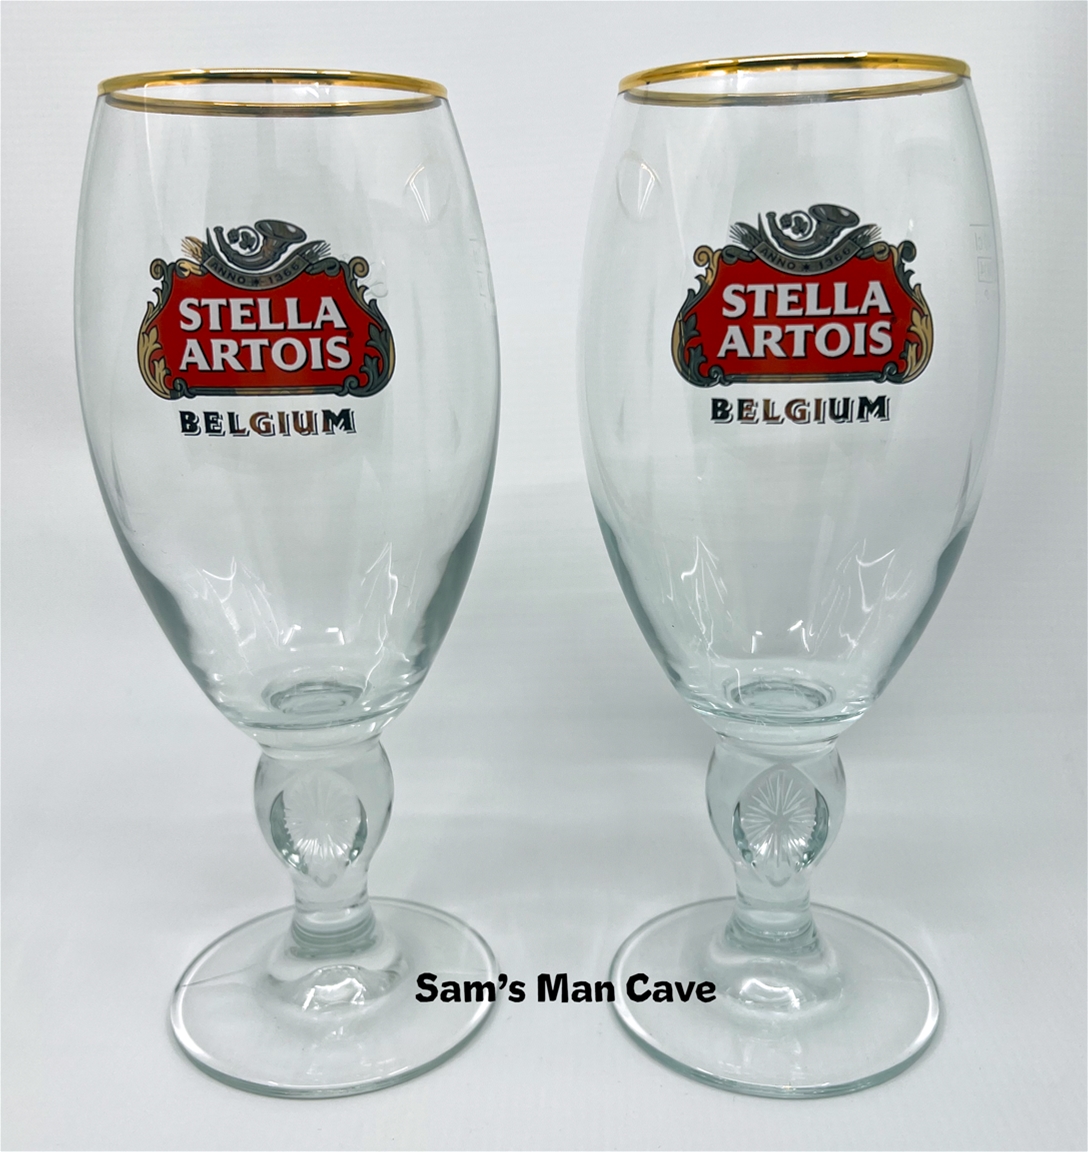 Details about   Set of 2 Stella Artois BELGIUM Beer Glasses Chalice Over 600 yrs of Brewing 40cl 